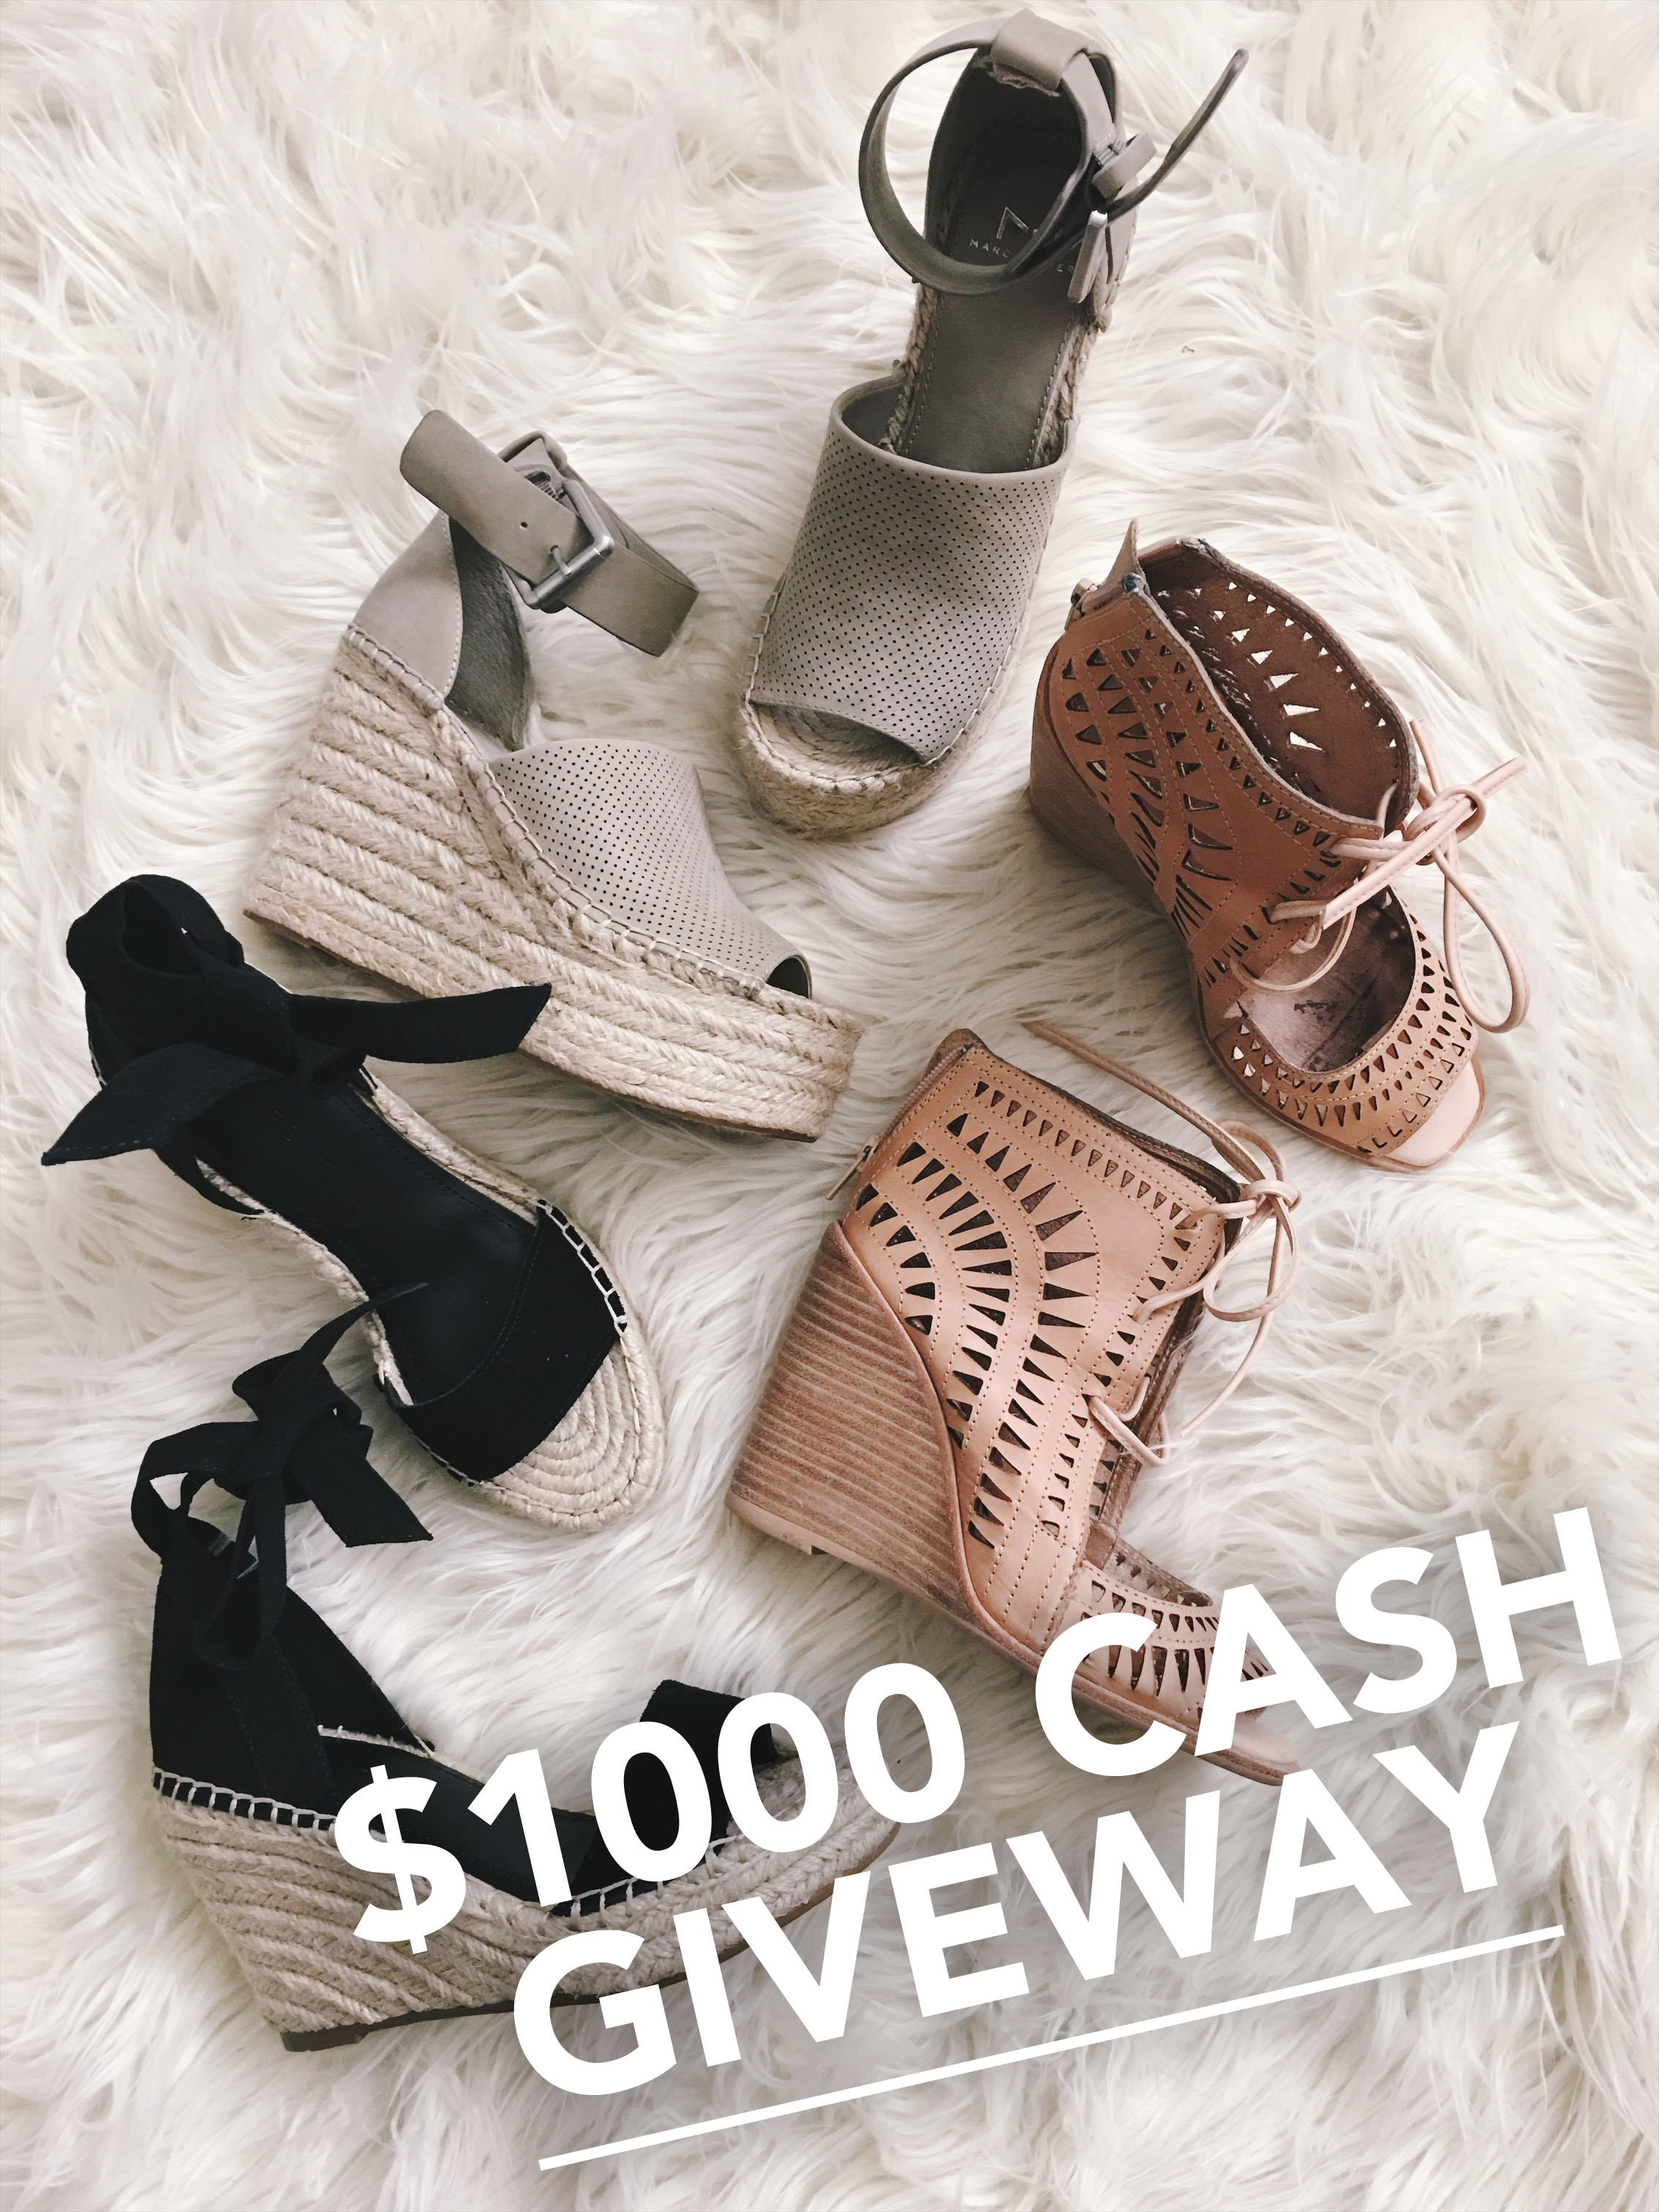 Win $1000 in Cash Giveaway